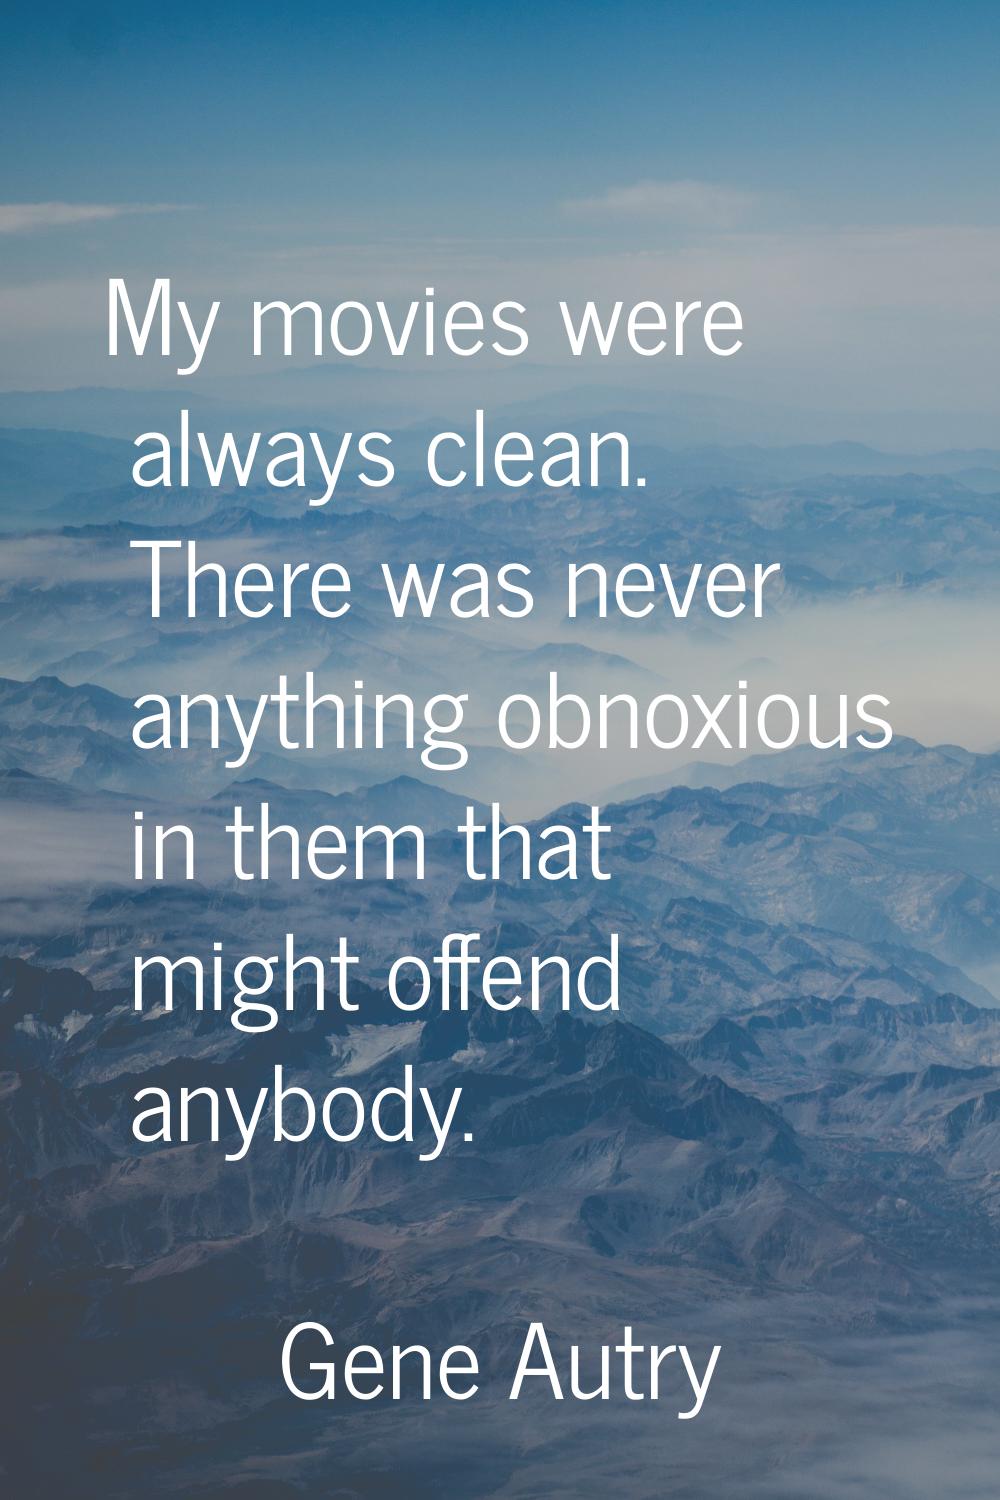 My movies were always clean. There was never anything obnoxious in them that might offend anybody.